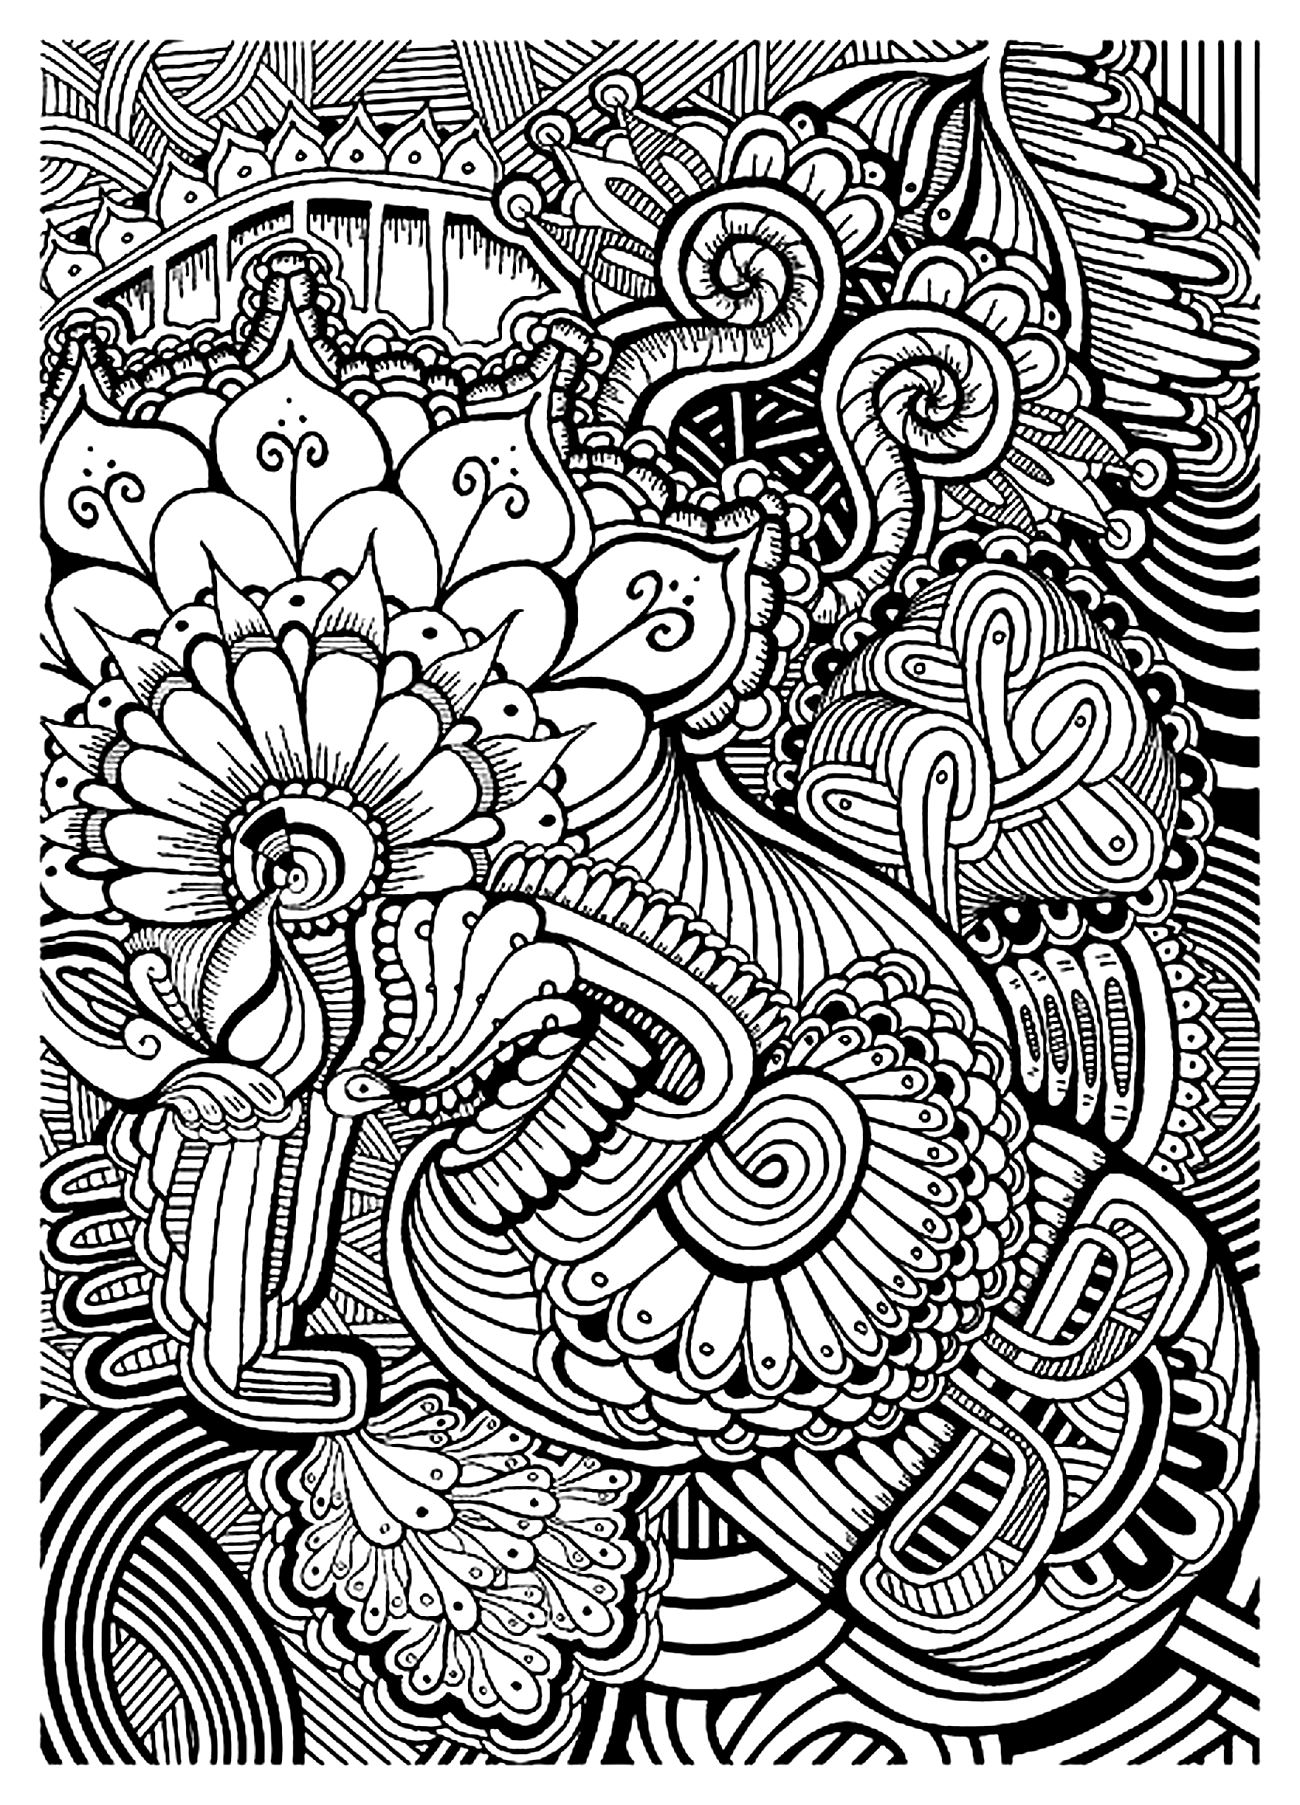 Zen Anti Stress Relax To Print Anti Stress Adult Coloring Pages 